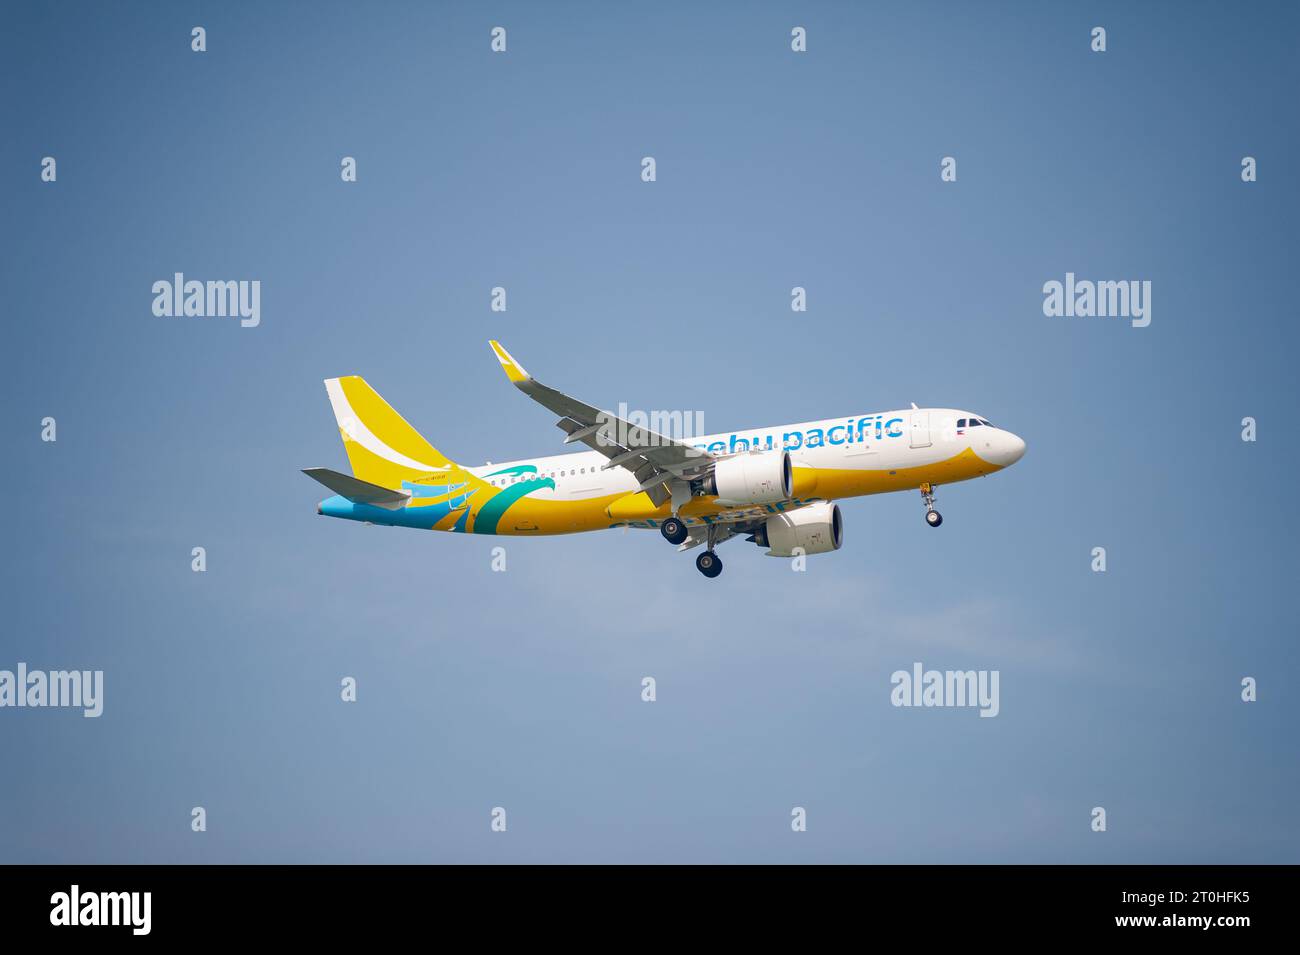 30.07.2023, Singapore, Republic of Singapore, Asia - Airbus A320-200 Neo passenger aircraft of the Philippine airline Cebu Pacific Air lands at Changi. Stock Photo